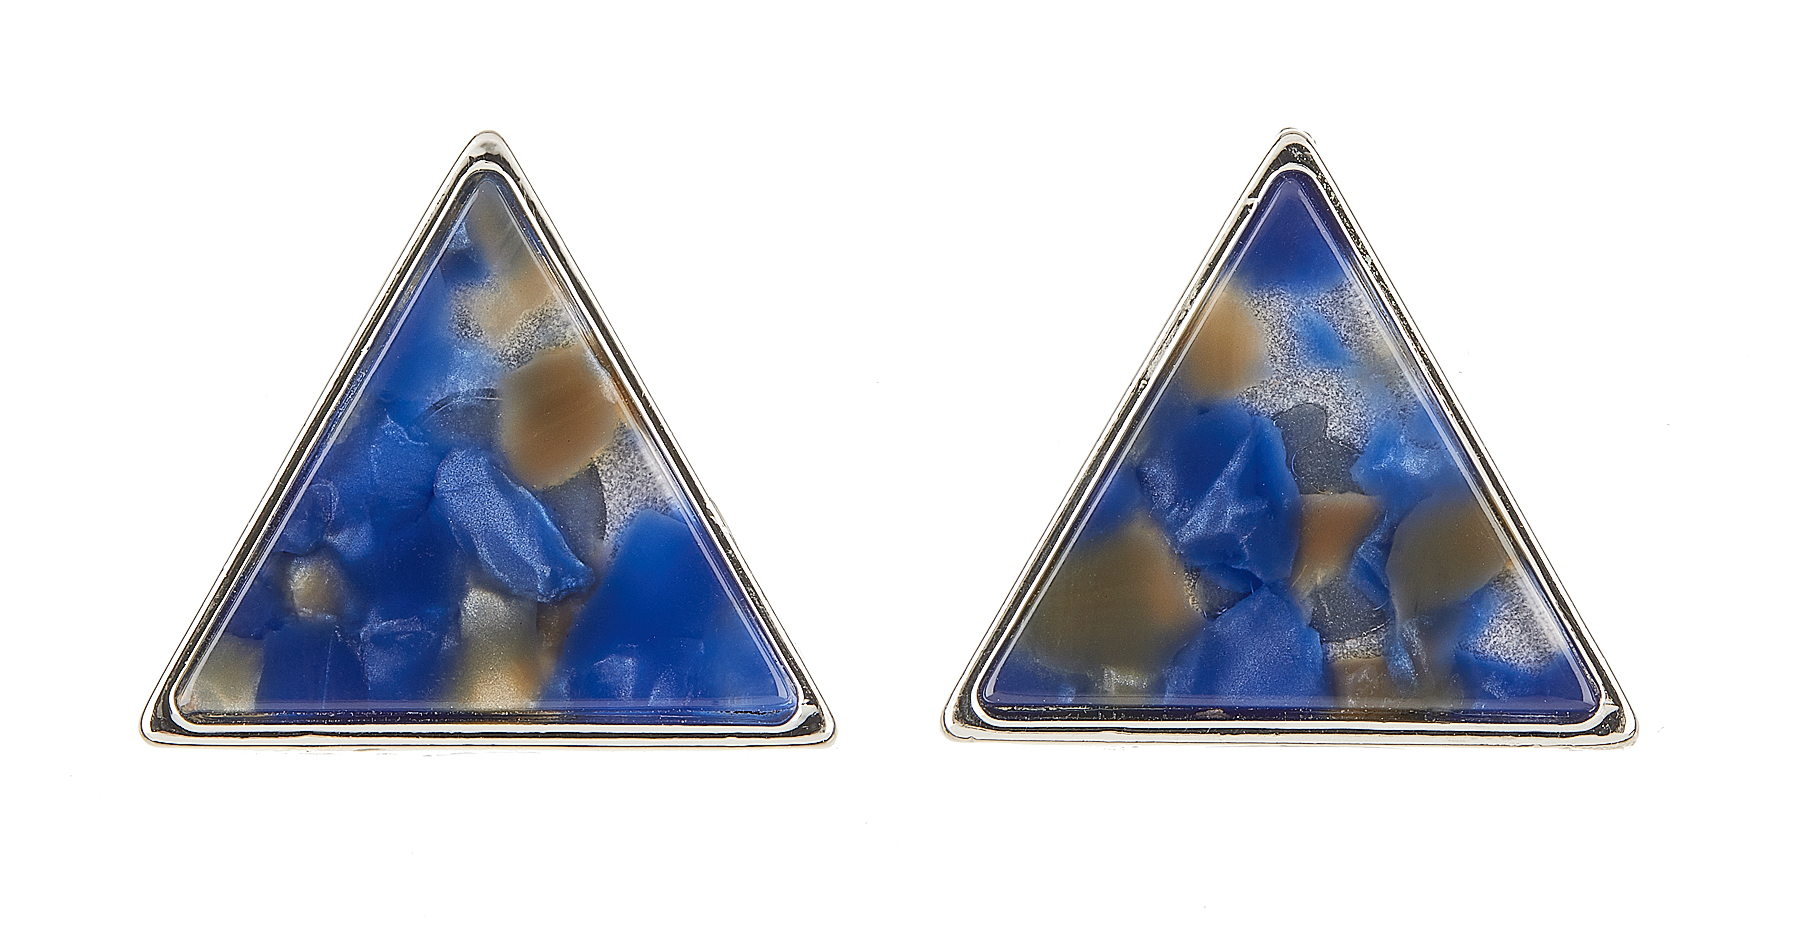 Clip On Earrings - Enid BL - silver triangle stud earring inset with blue acrylic